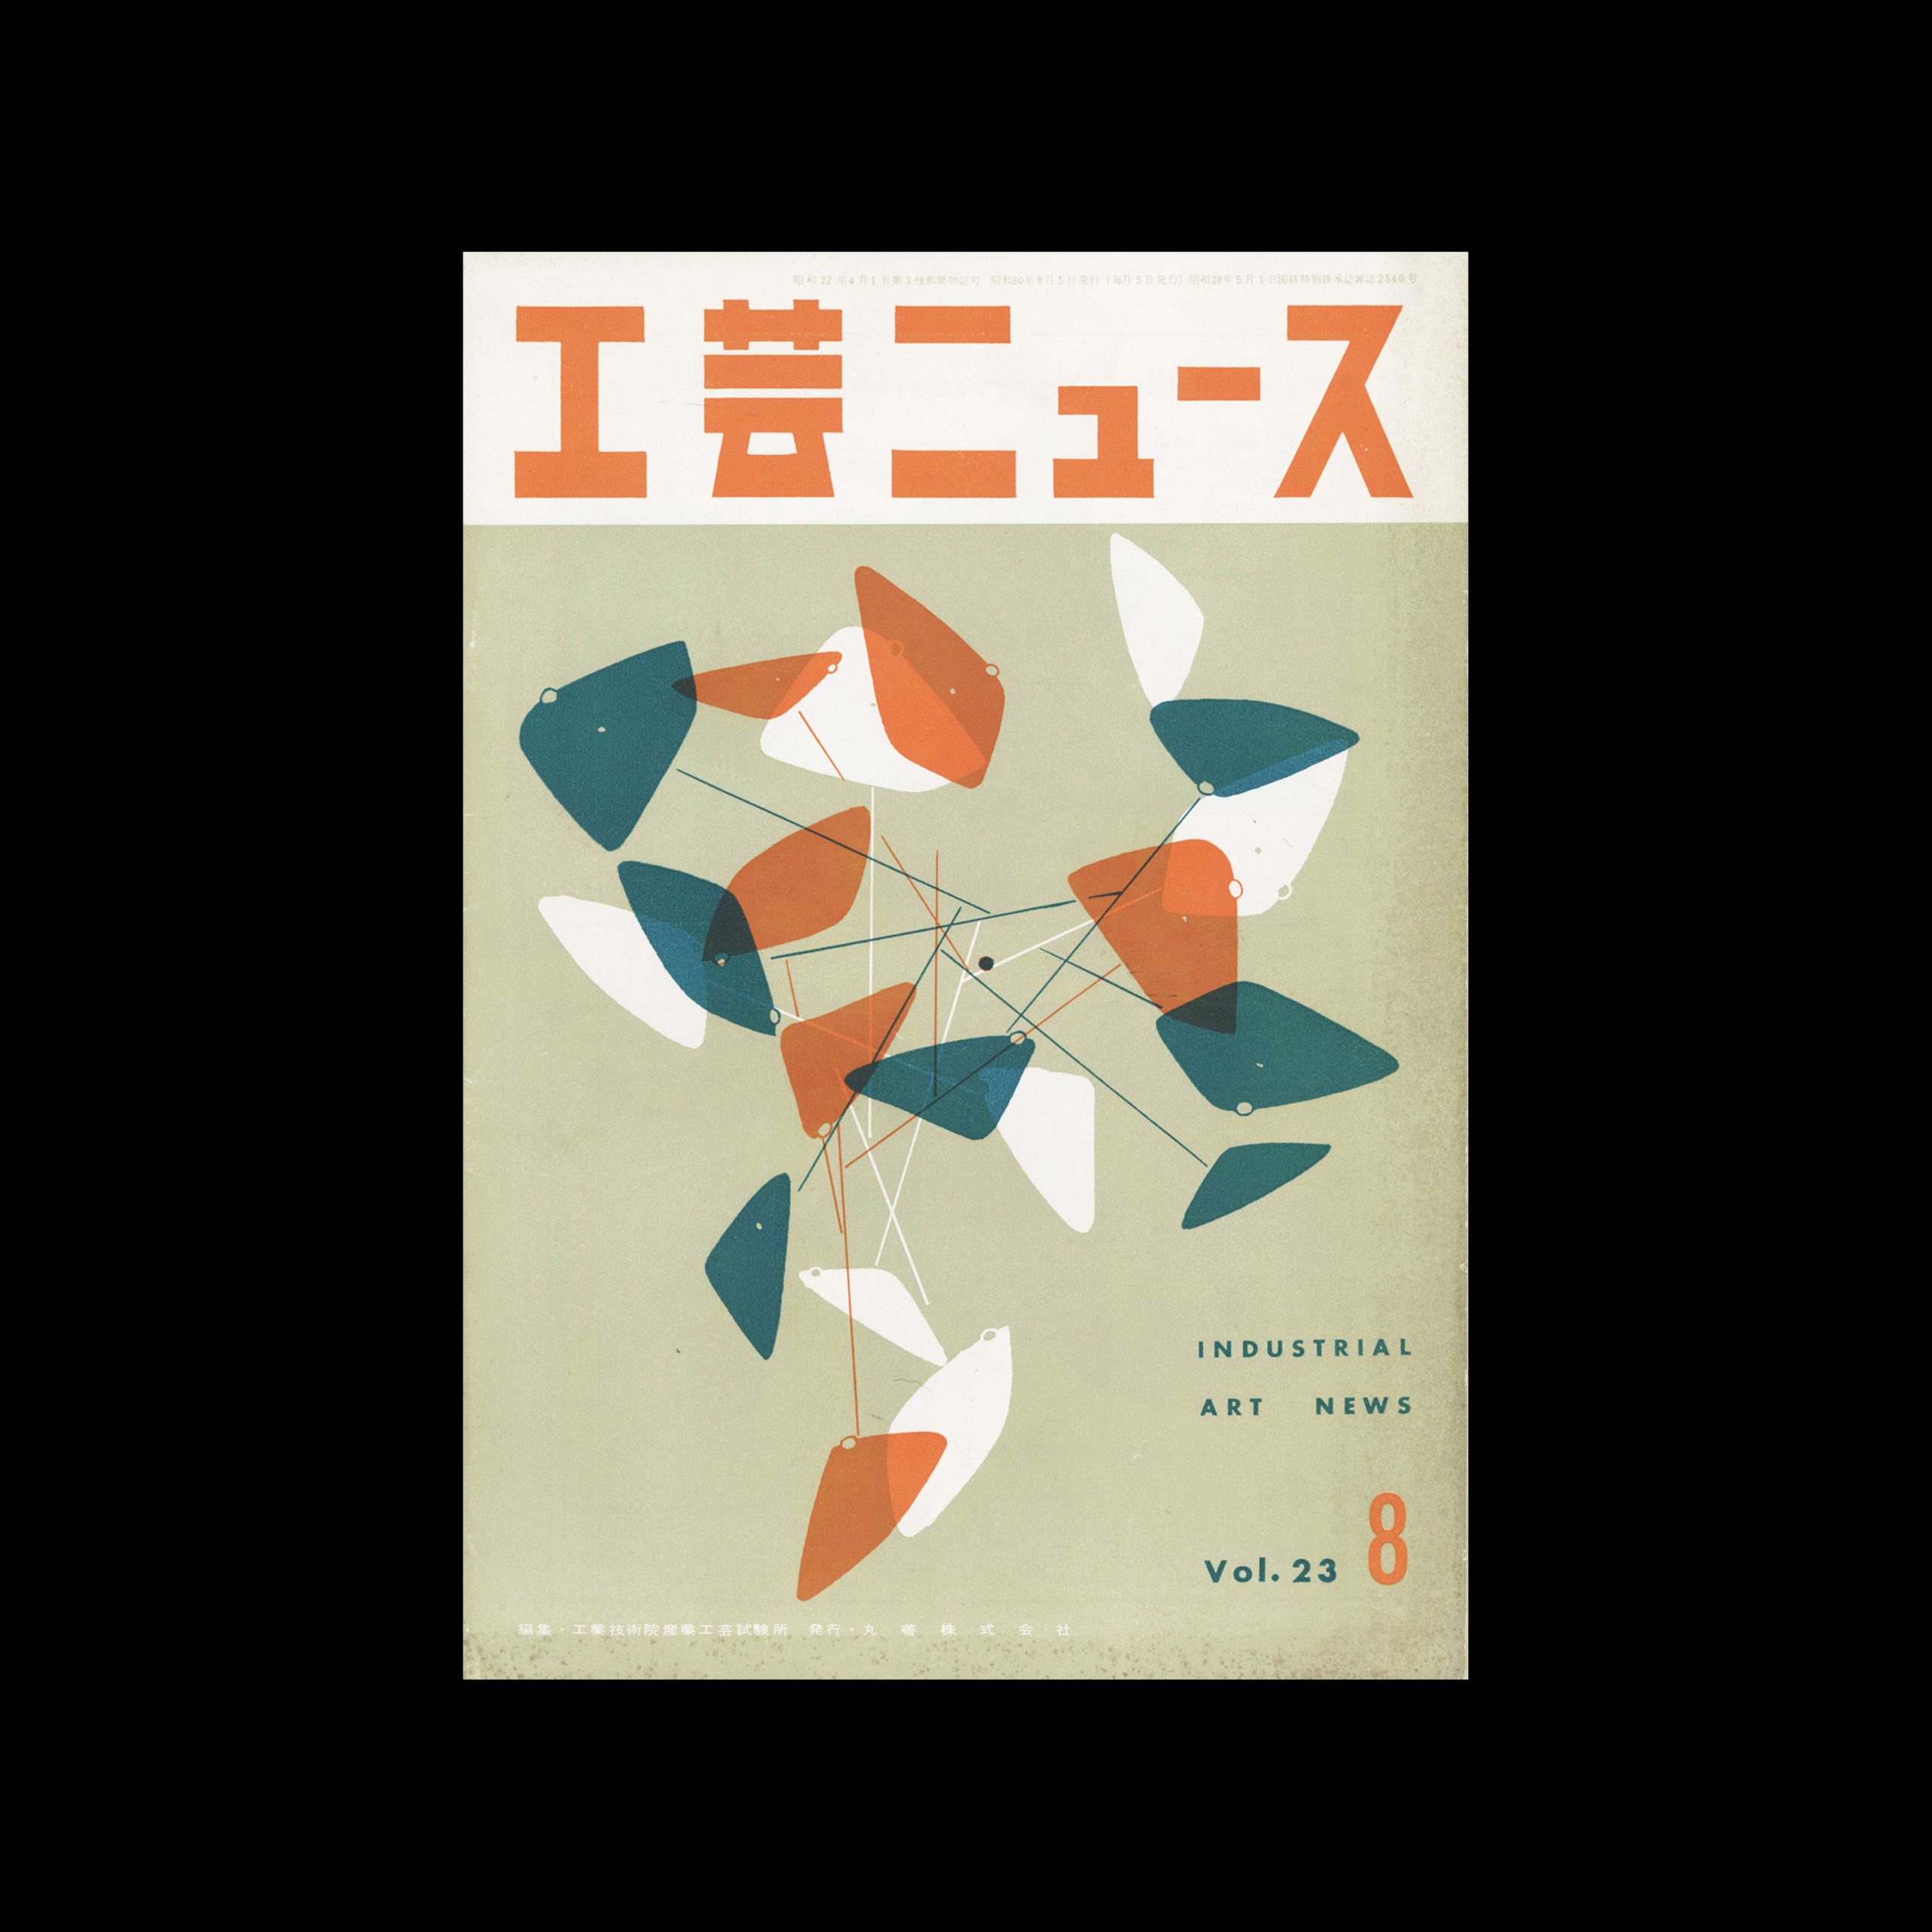 Industrial Art News - Vol. 23, No. 8, August 1955. Cover design by Kō Yanome